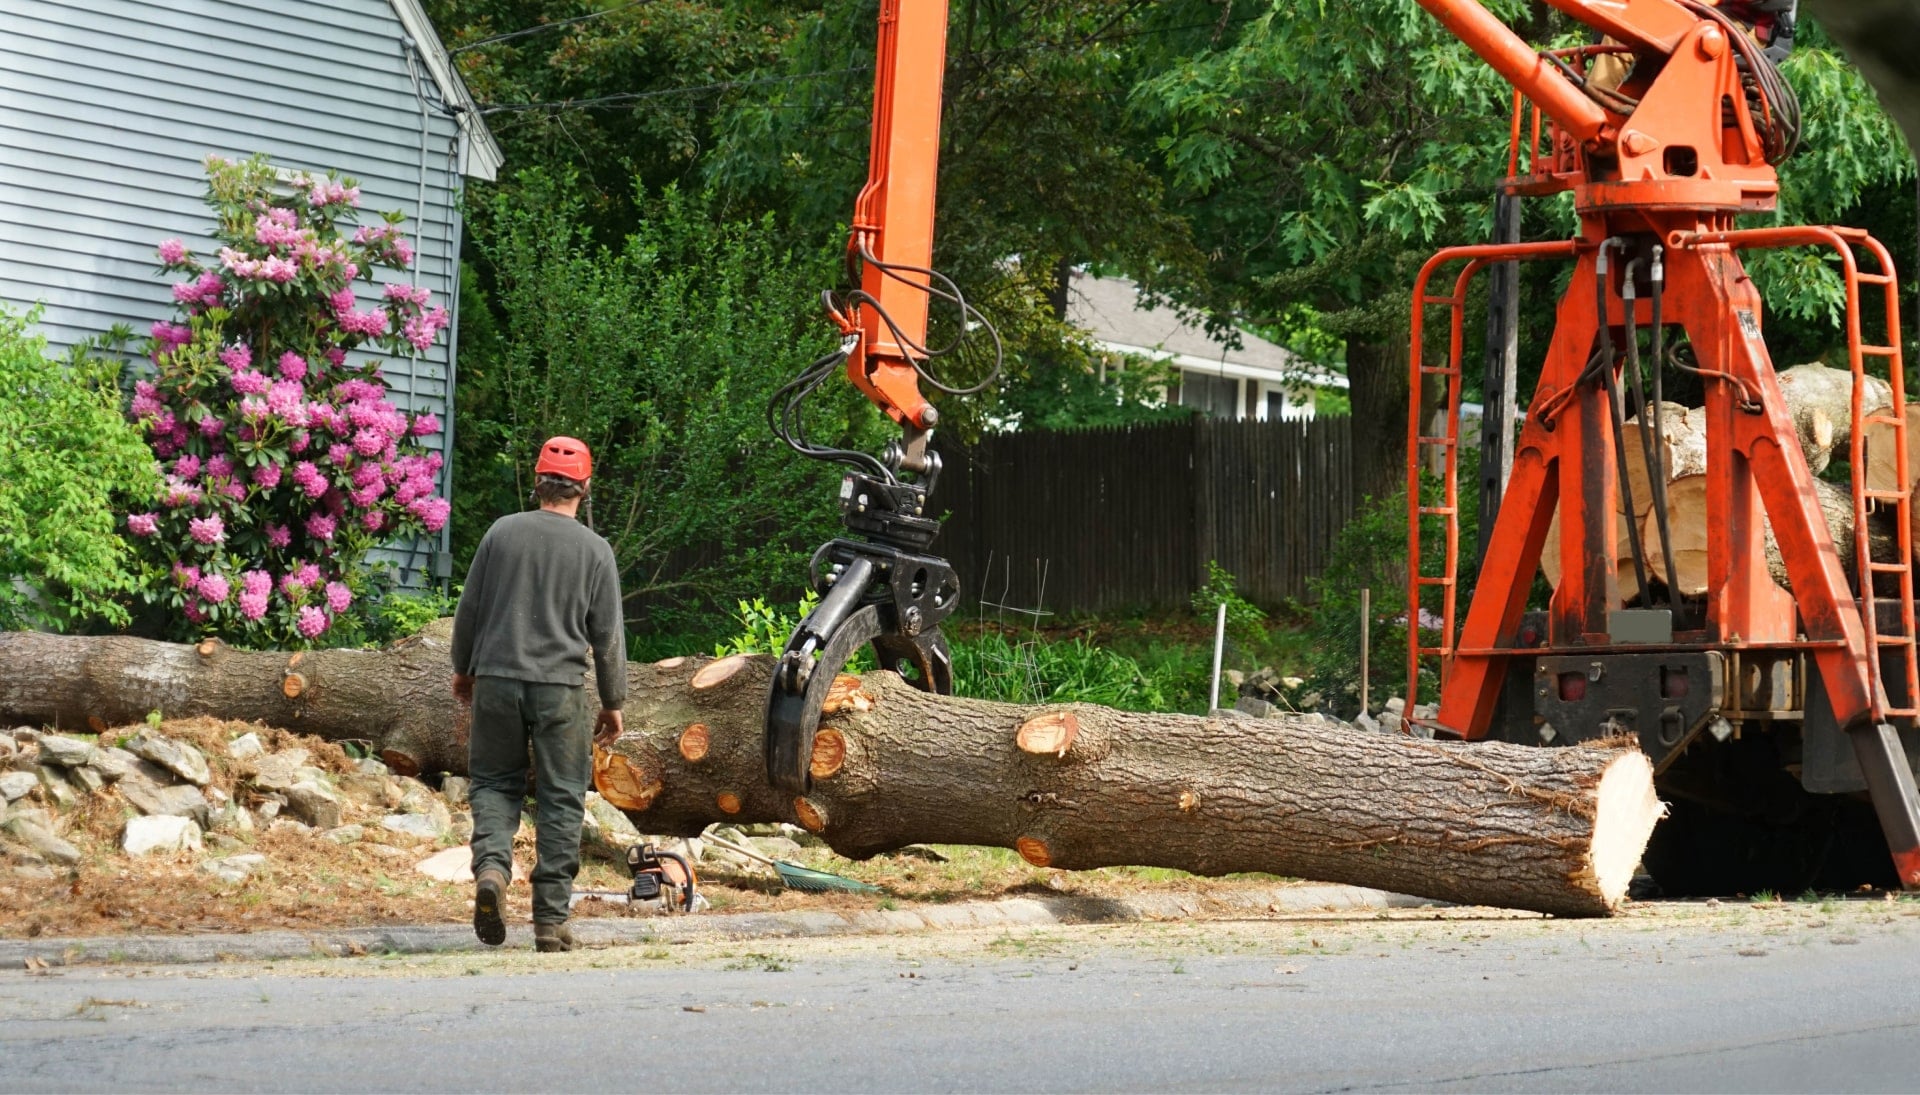 Local partner for Tree removal services in Reseda